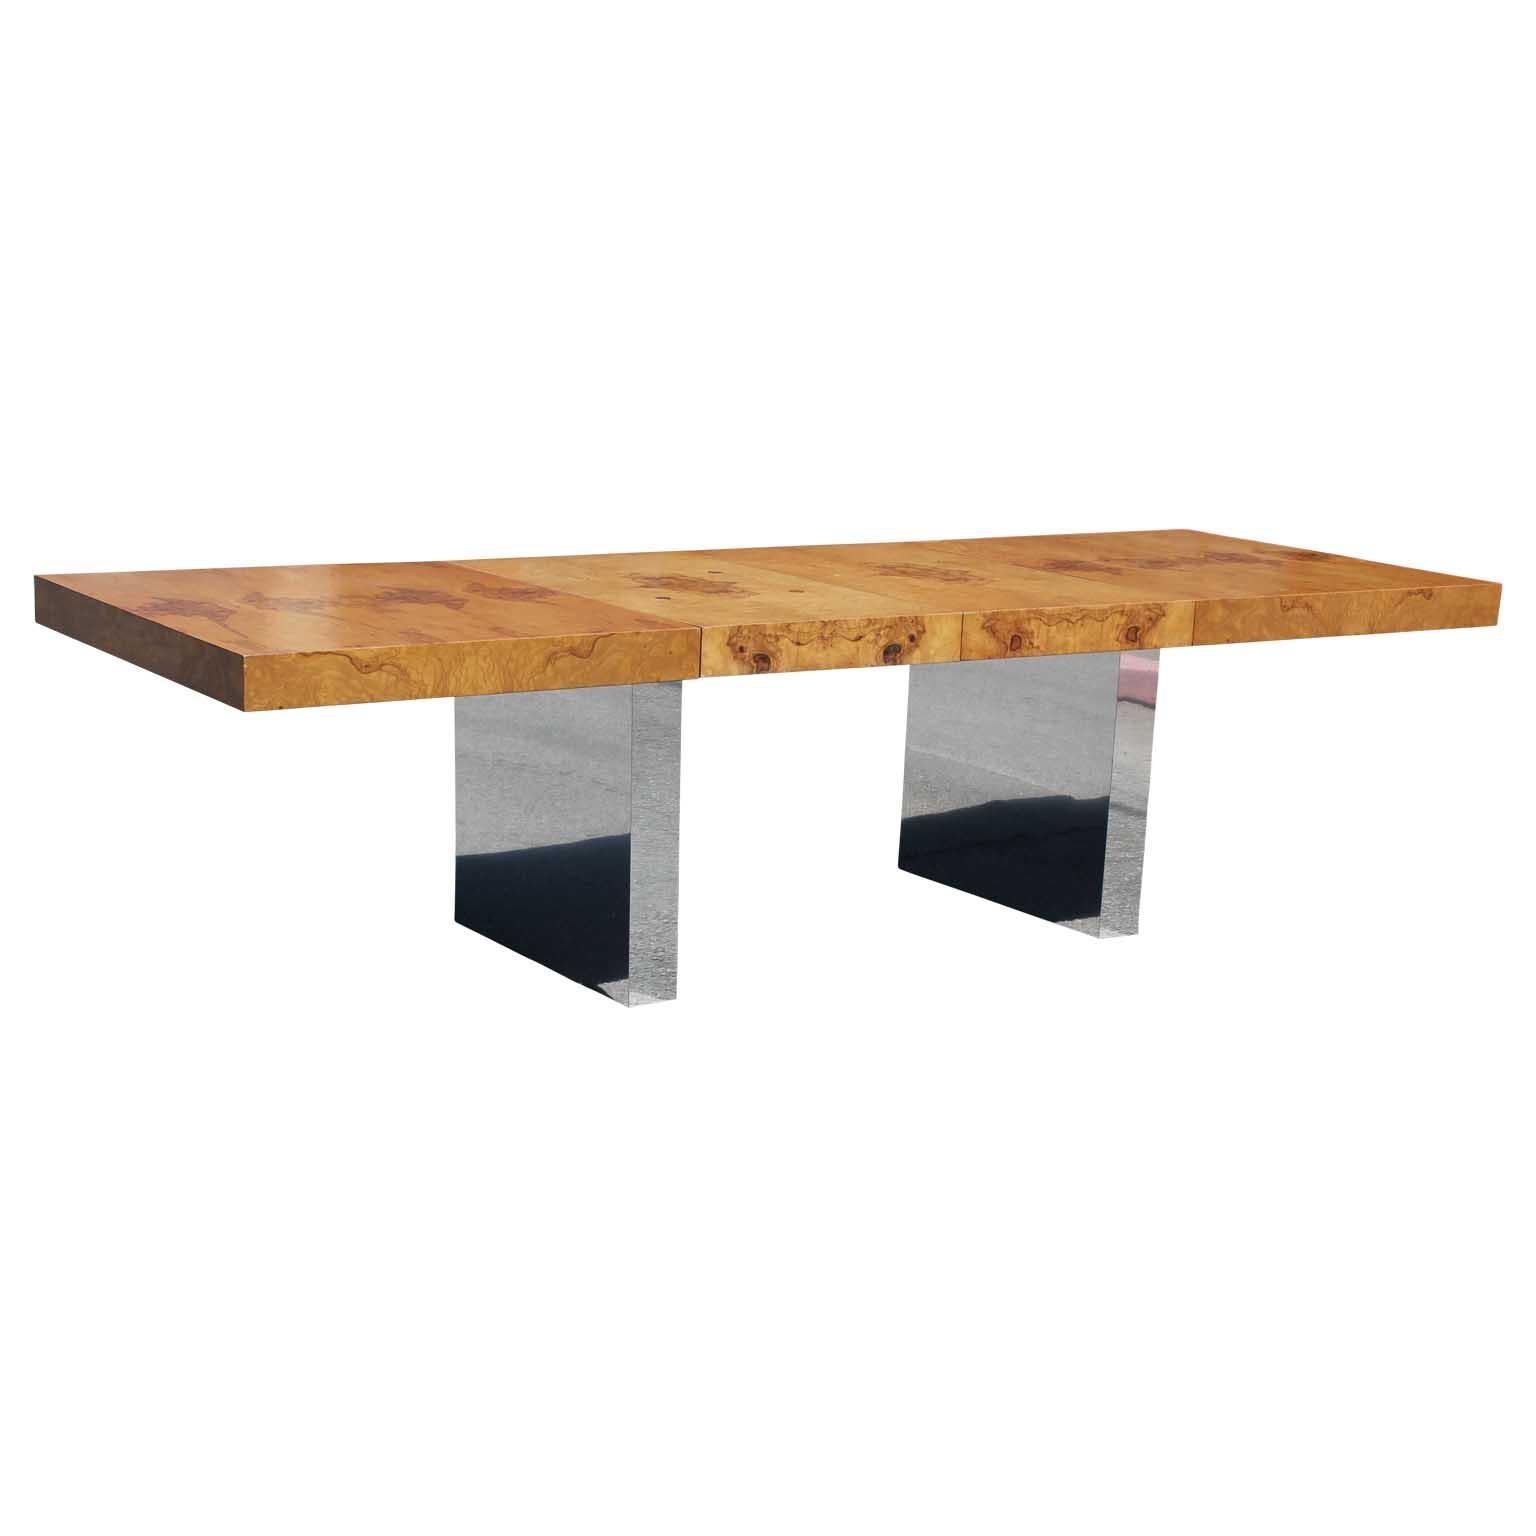 Sturdy expandable dining table by Milo Baughman for Thayer Coggin. Modern design with beautiful burl wood and chrome legs. 
This table has two removable leaves each measuring 22 inches wide for an additional 44 inches in total. Width without leaves